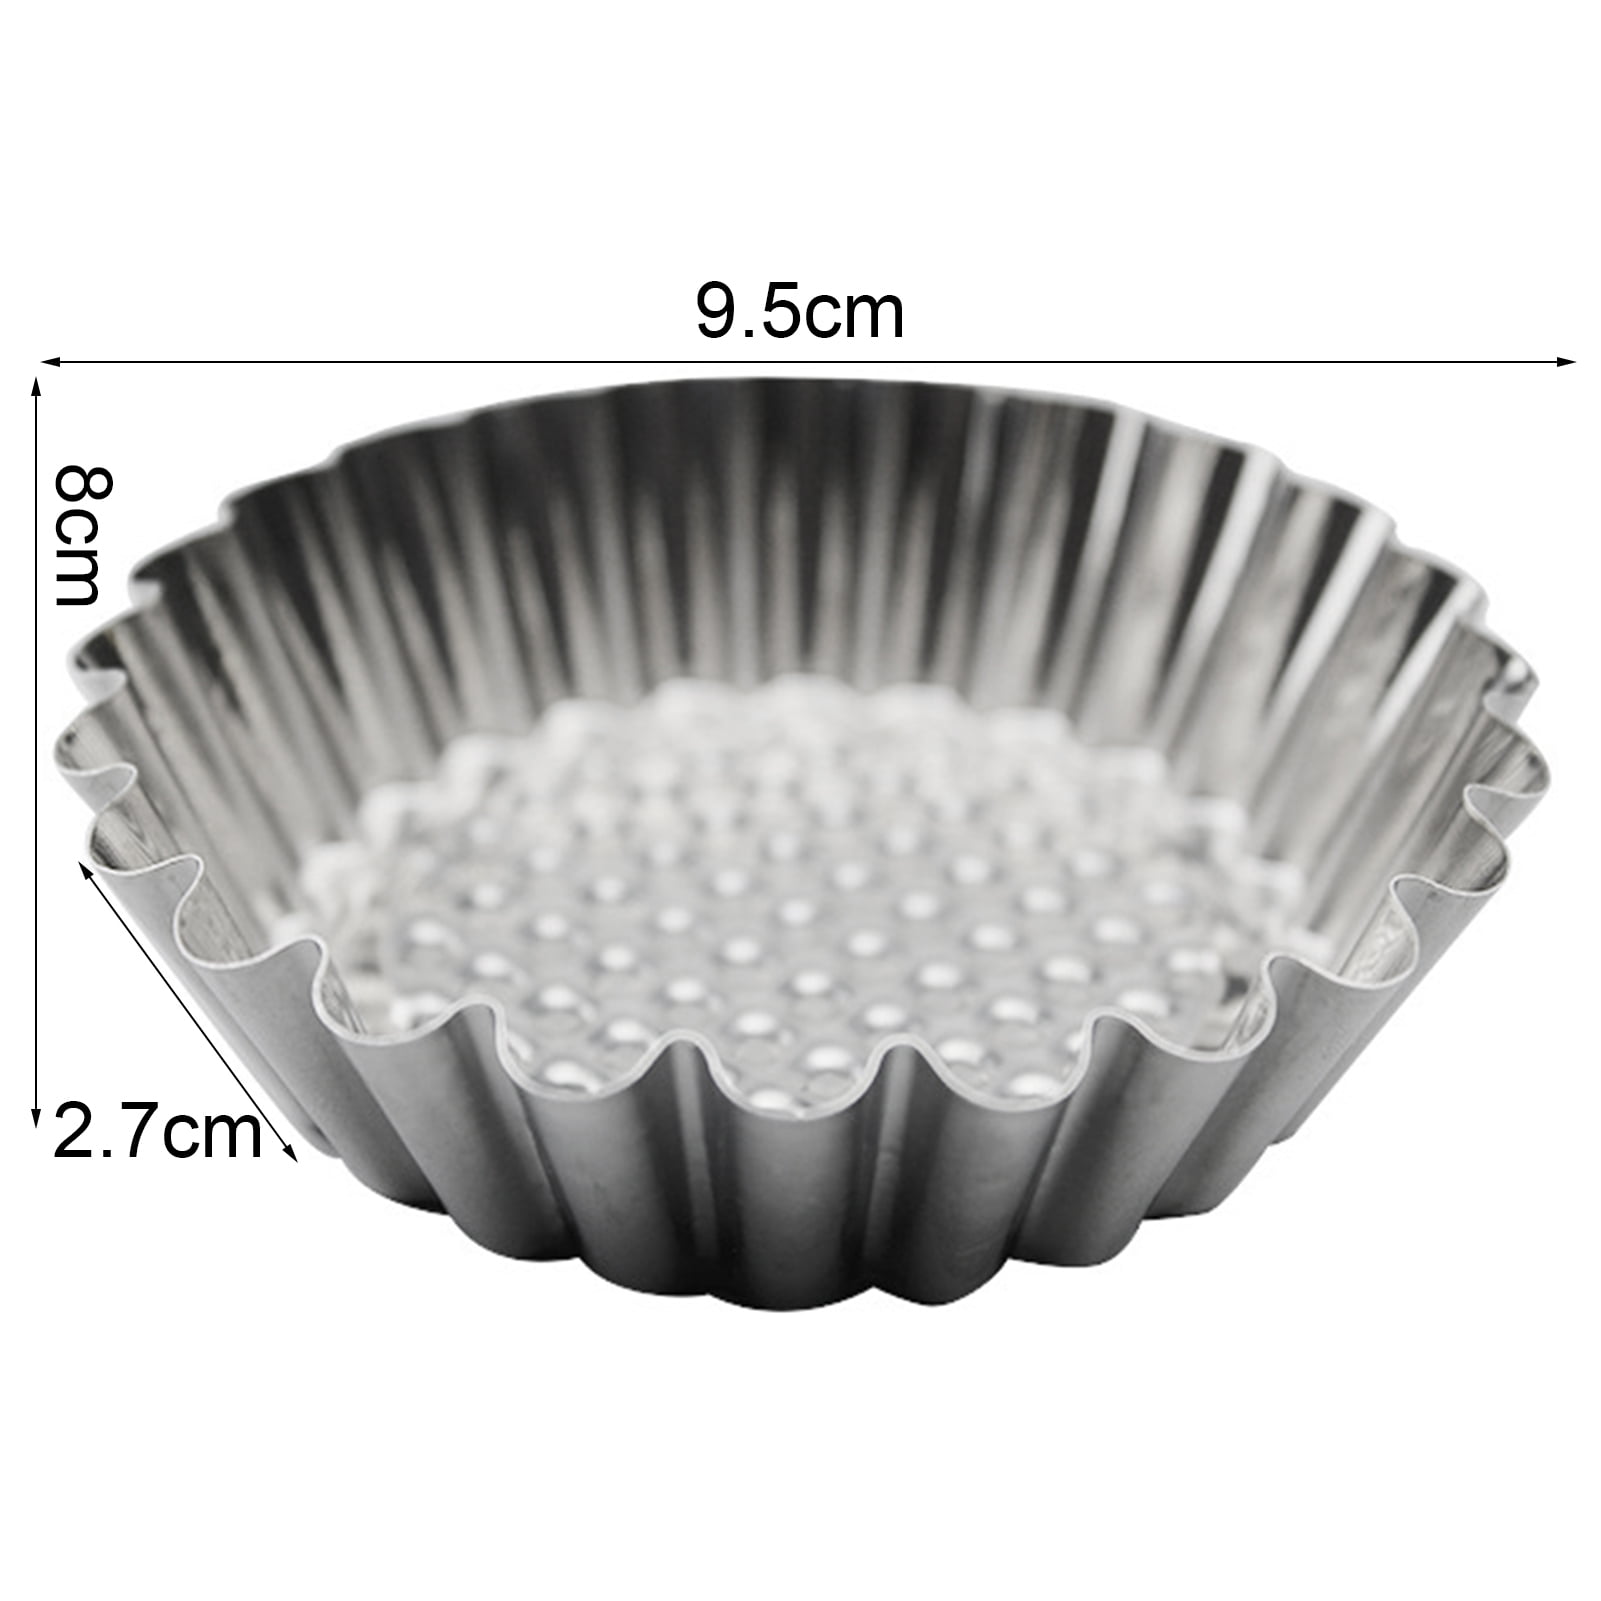  LABRIMP Non-stick Cake Pan Baking Molds Nonstick Baking Pan 9x9  Baking Pan Cheesecake Pan Metal Cake Tray Metal Cupcake Pan Square Tool  Cheese Baking Mold Stainless Steel Pastry Barbecue: Home 